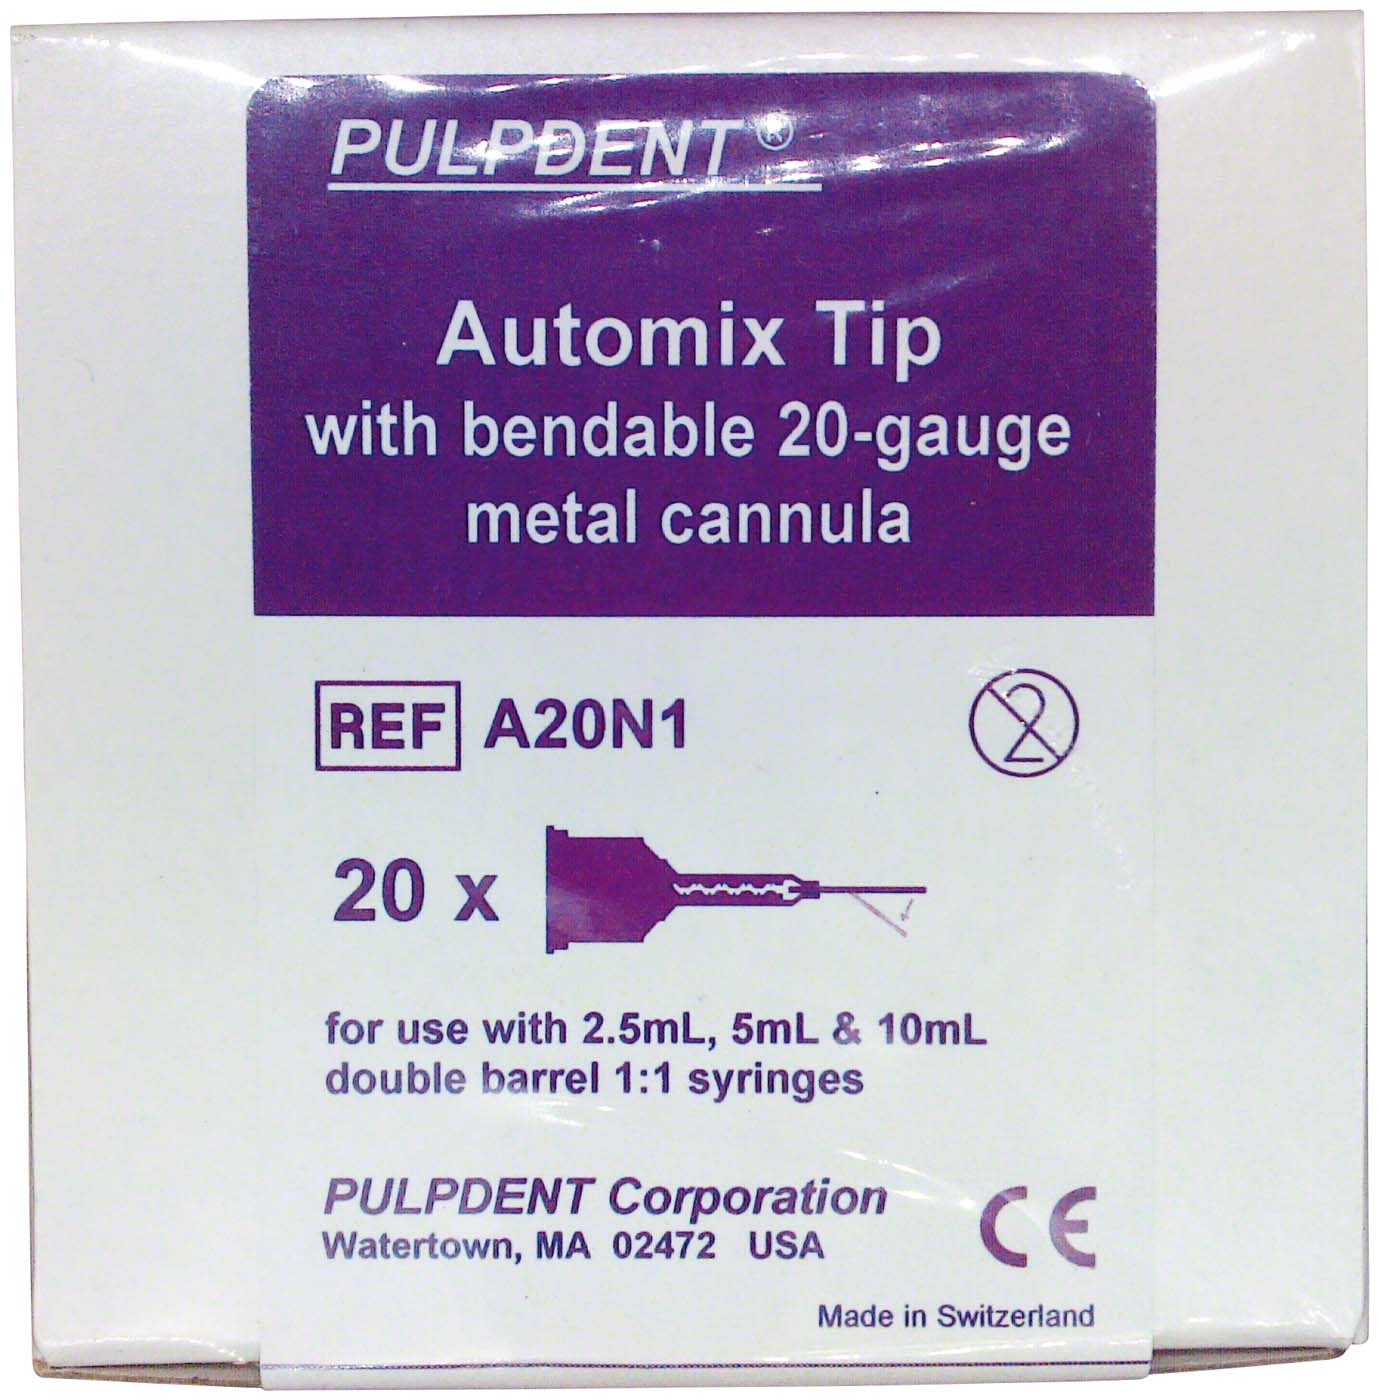  Automix Tips PULPDENT